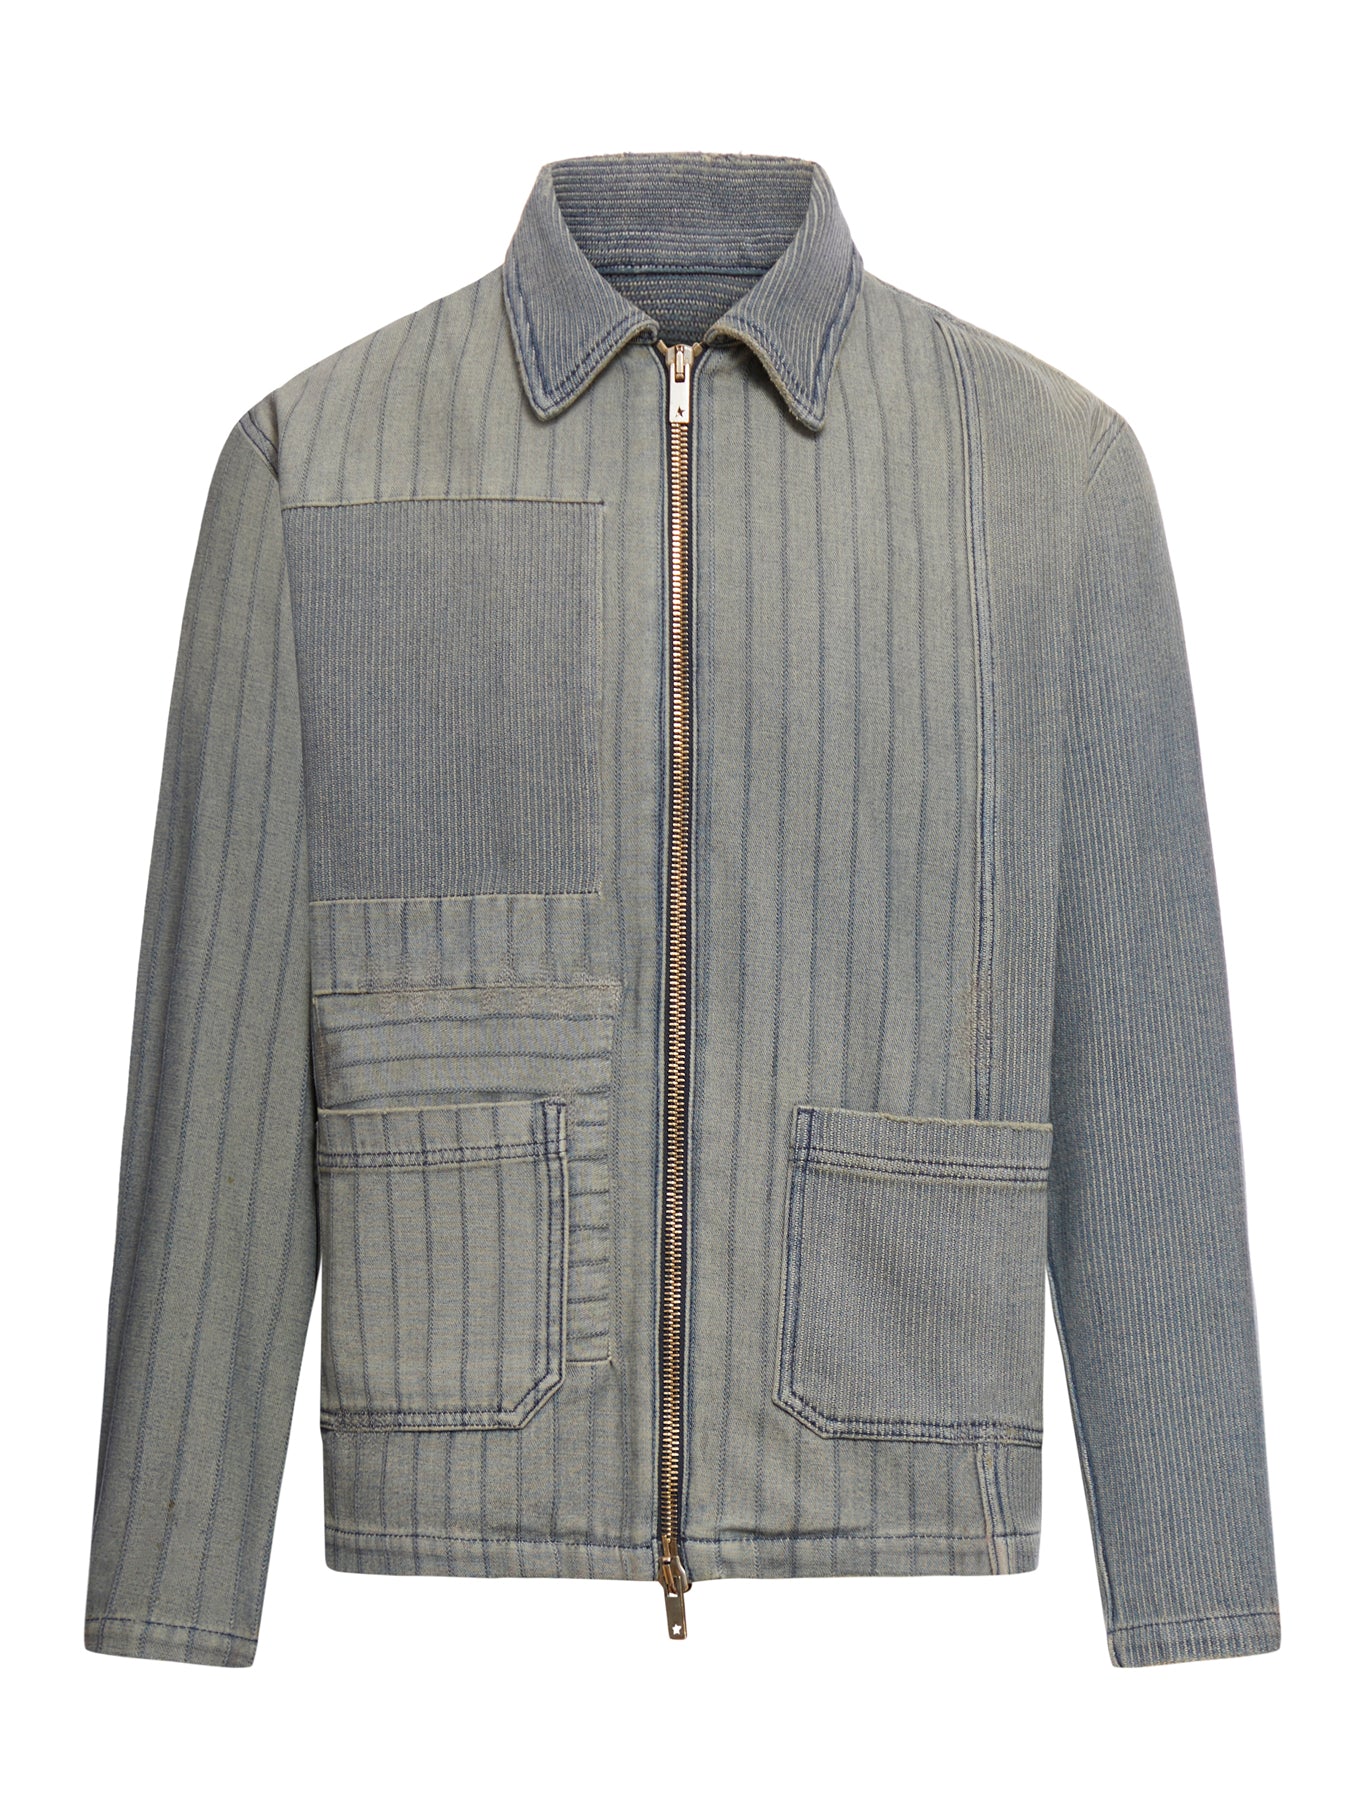 JOURNEY M`S FULL ZIP JACKET DYED DENIM PATCHED STRIPES